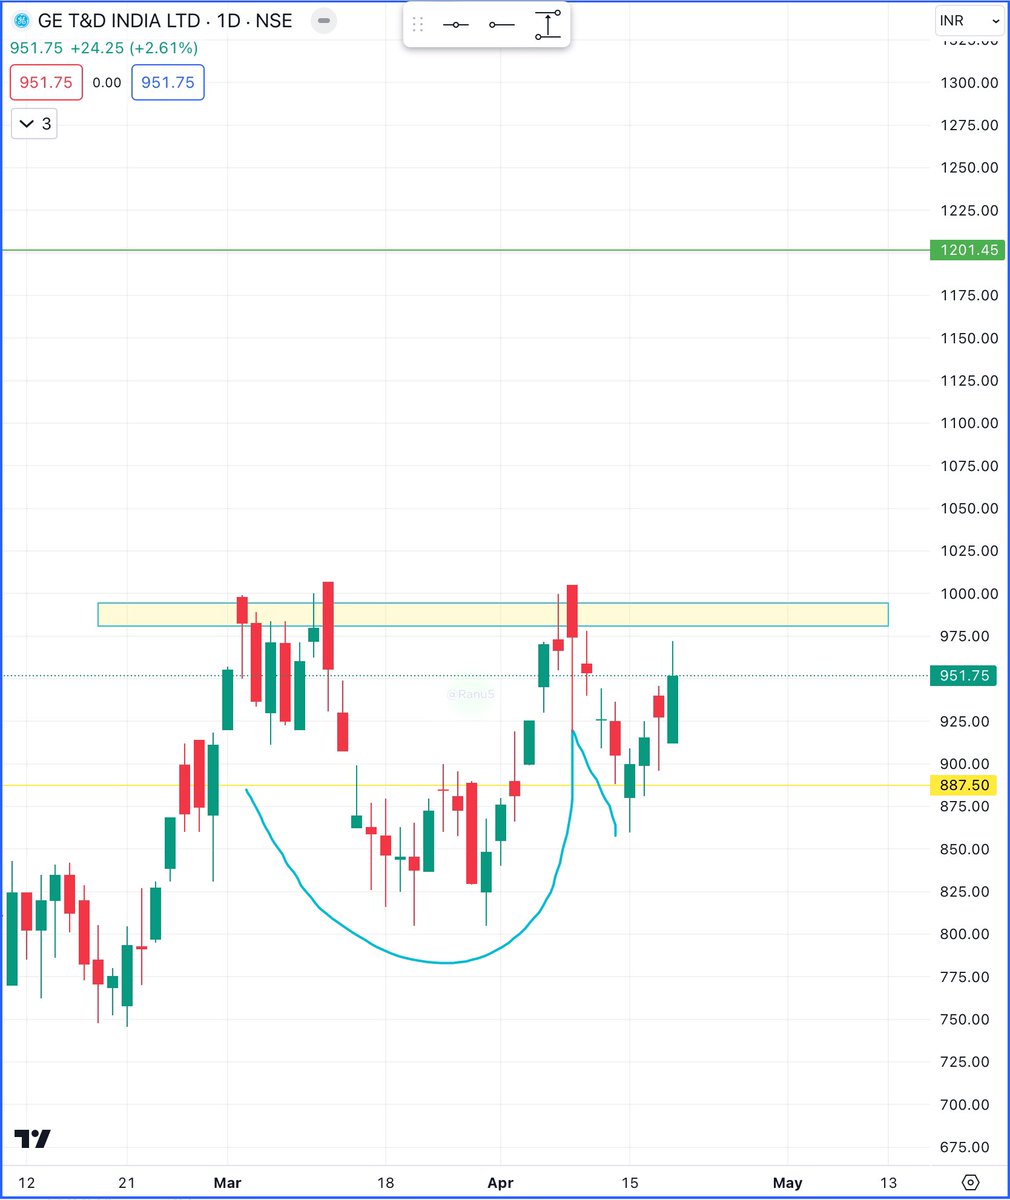 #get_d 
CMP 951
Waiting for breakout so keep an eye 
Expected level 1201
It’s not a buy sell recommendation 

#StockToWatch #StocksInFocus #BREAKOUTSTOCKS